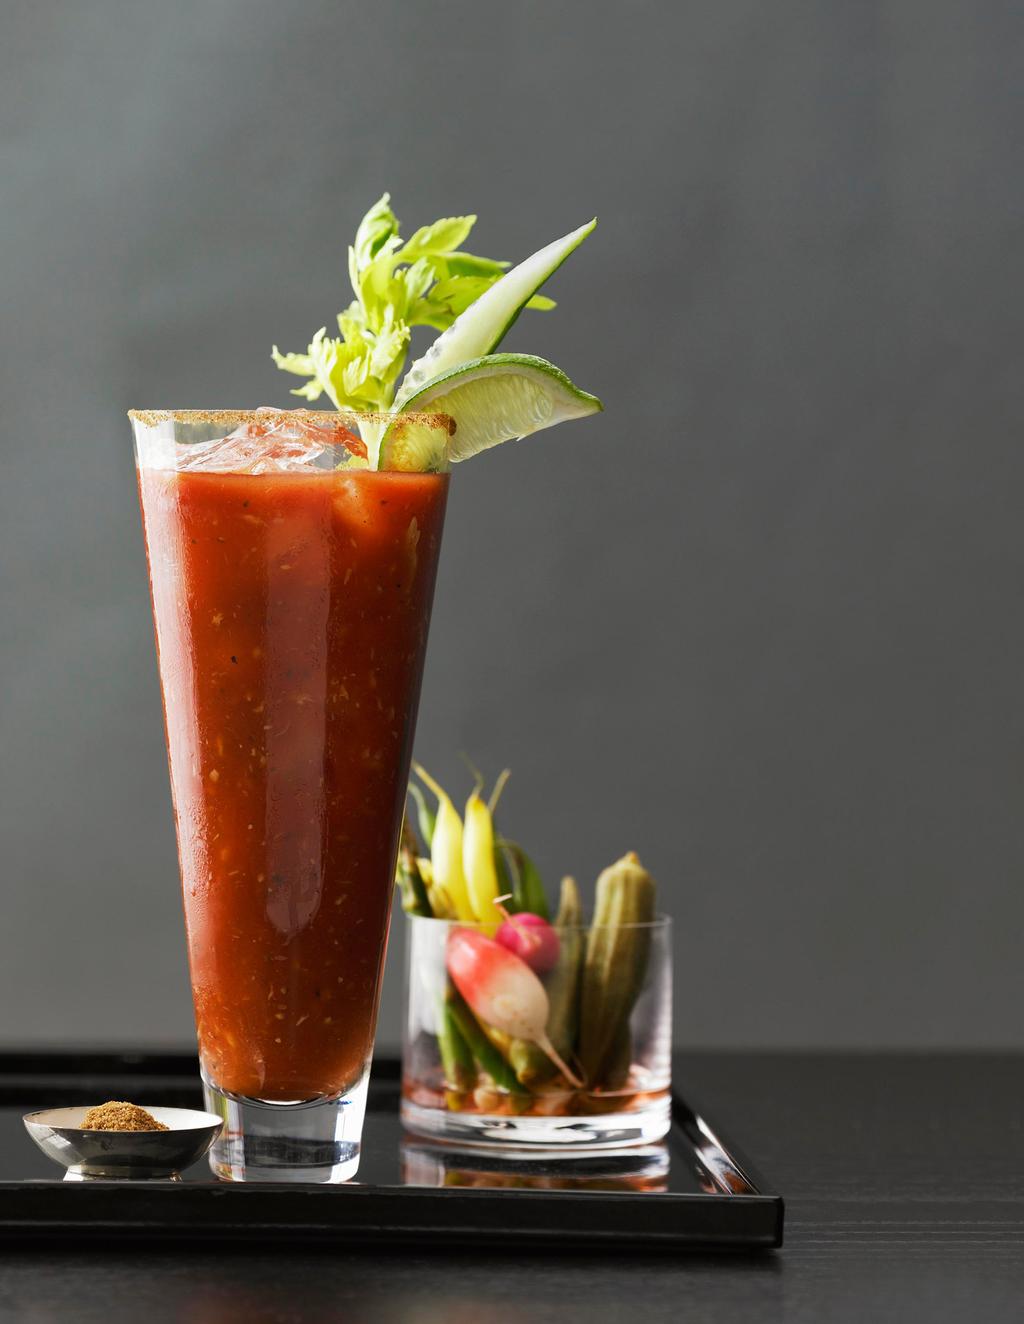 Bloody Mary Contributed by Nick Mautone 1 1 4 oz 2 dashes 2 tsp 2 dashes 1 pinch 1 pinch 1 pinch Celery salt Lemon wedge Lime wedge Grey Goose Vodka Tomato juice Tabasco Sauce Prepared horseradish